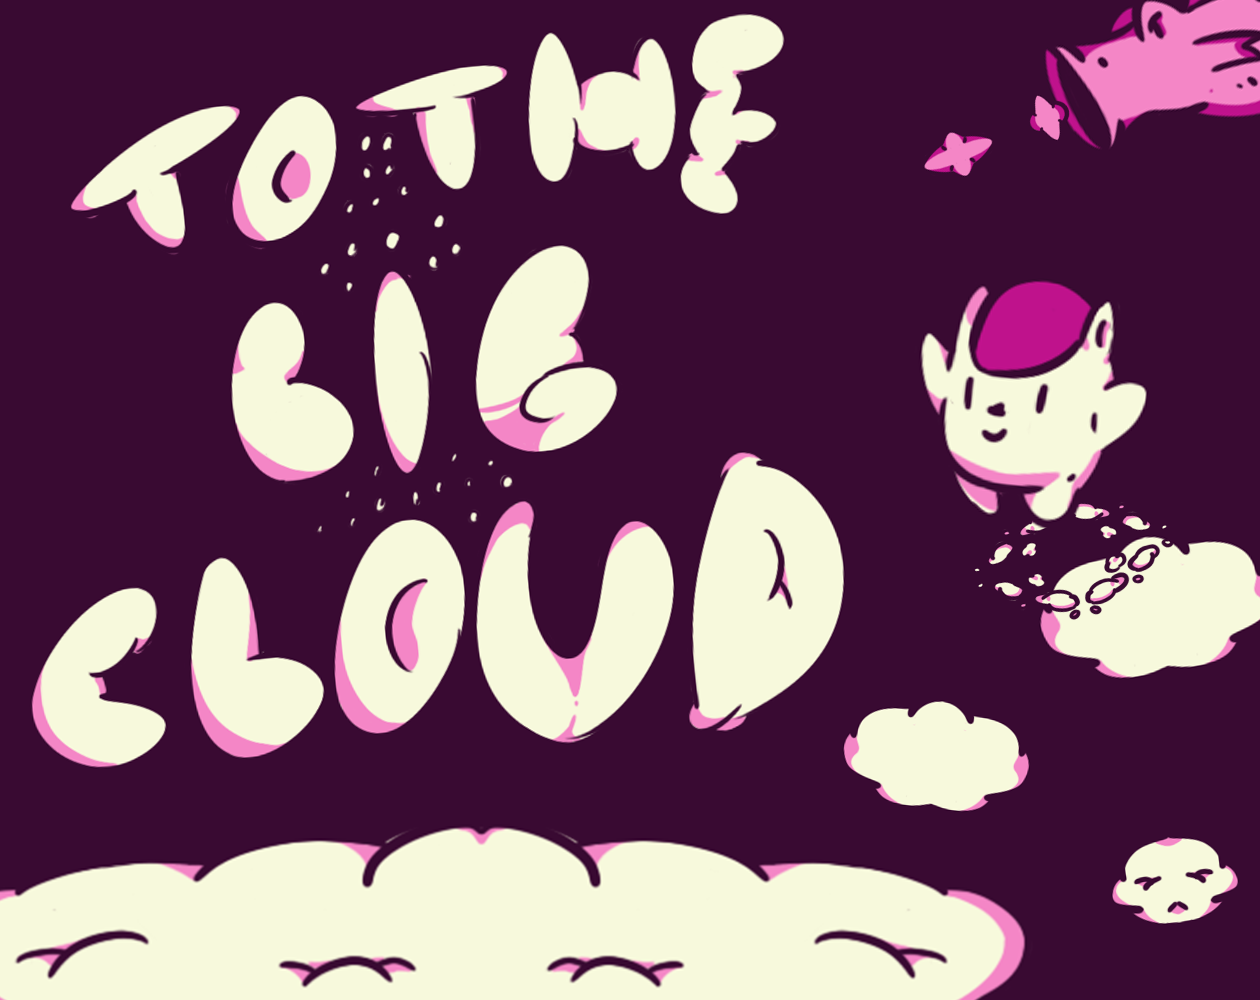 To The Big Cloud